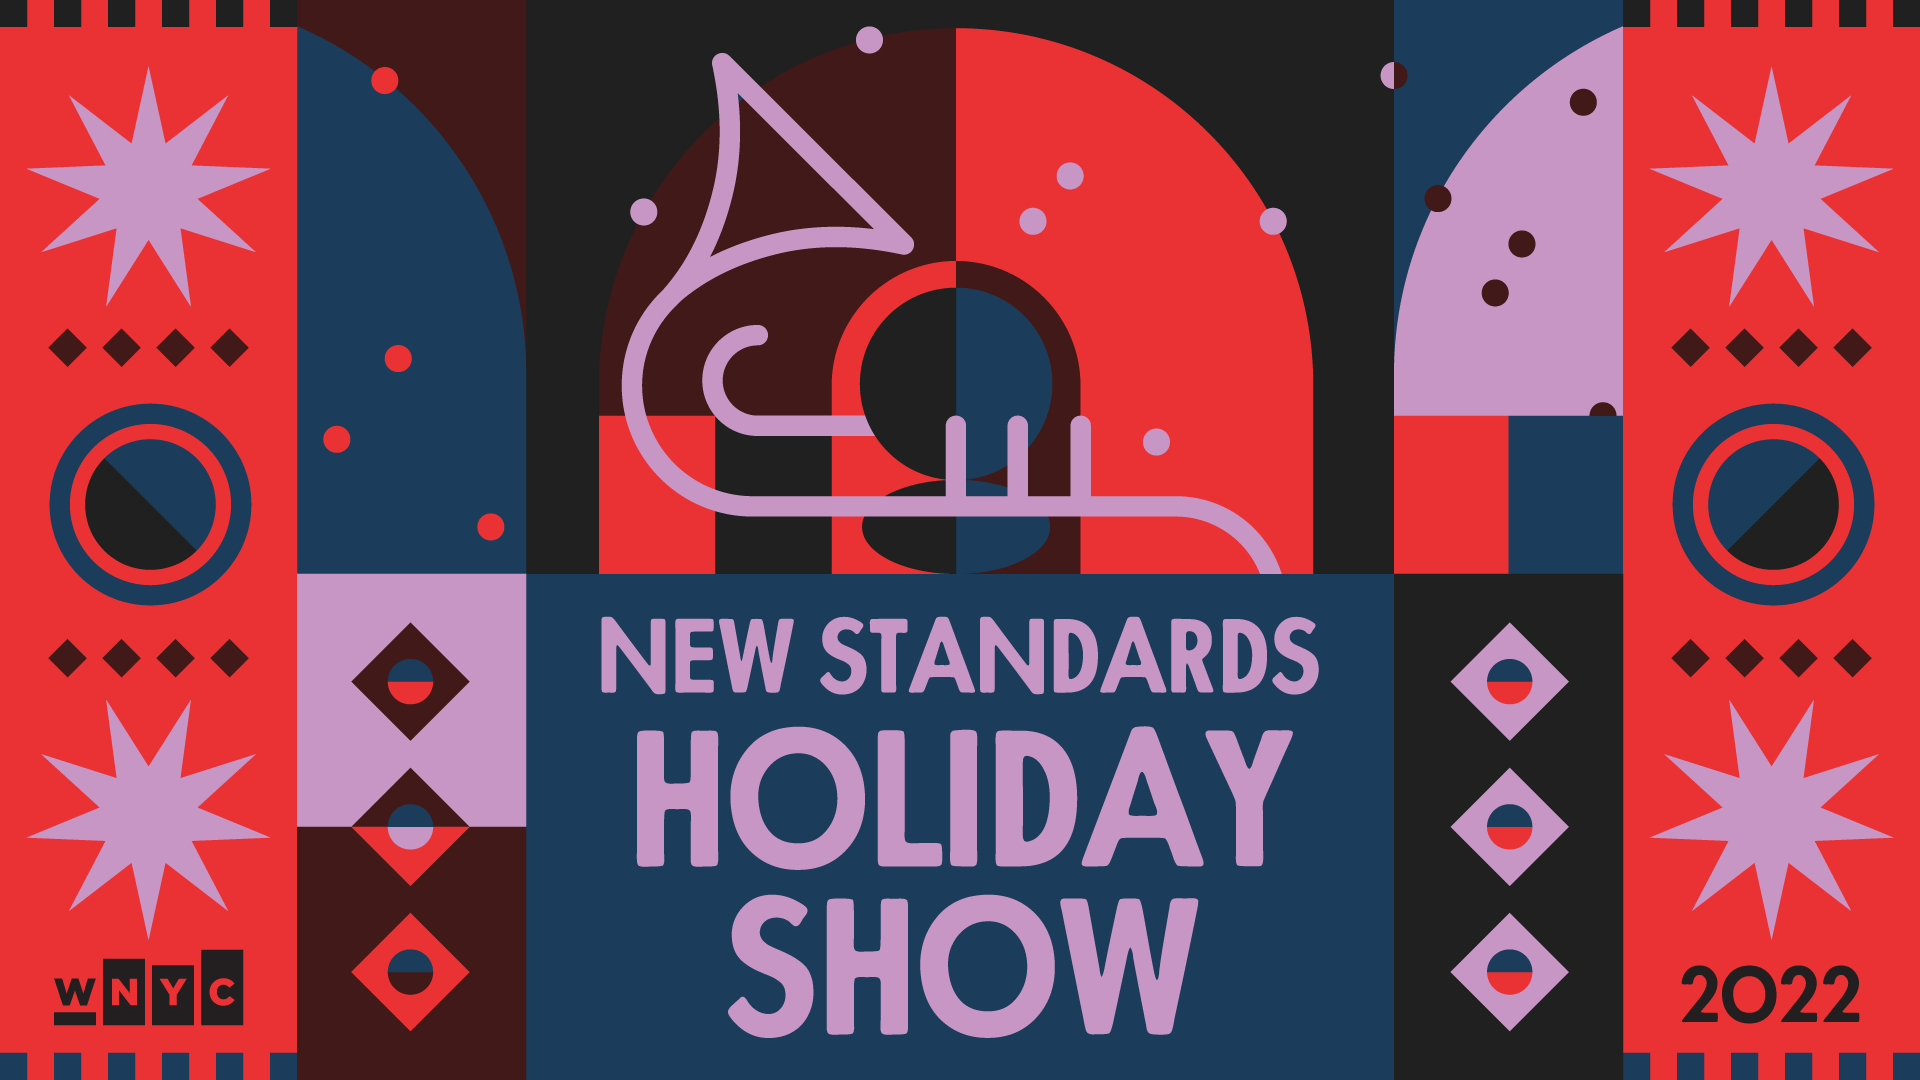 The New Standards Holiday Show